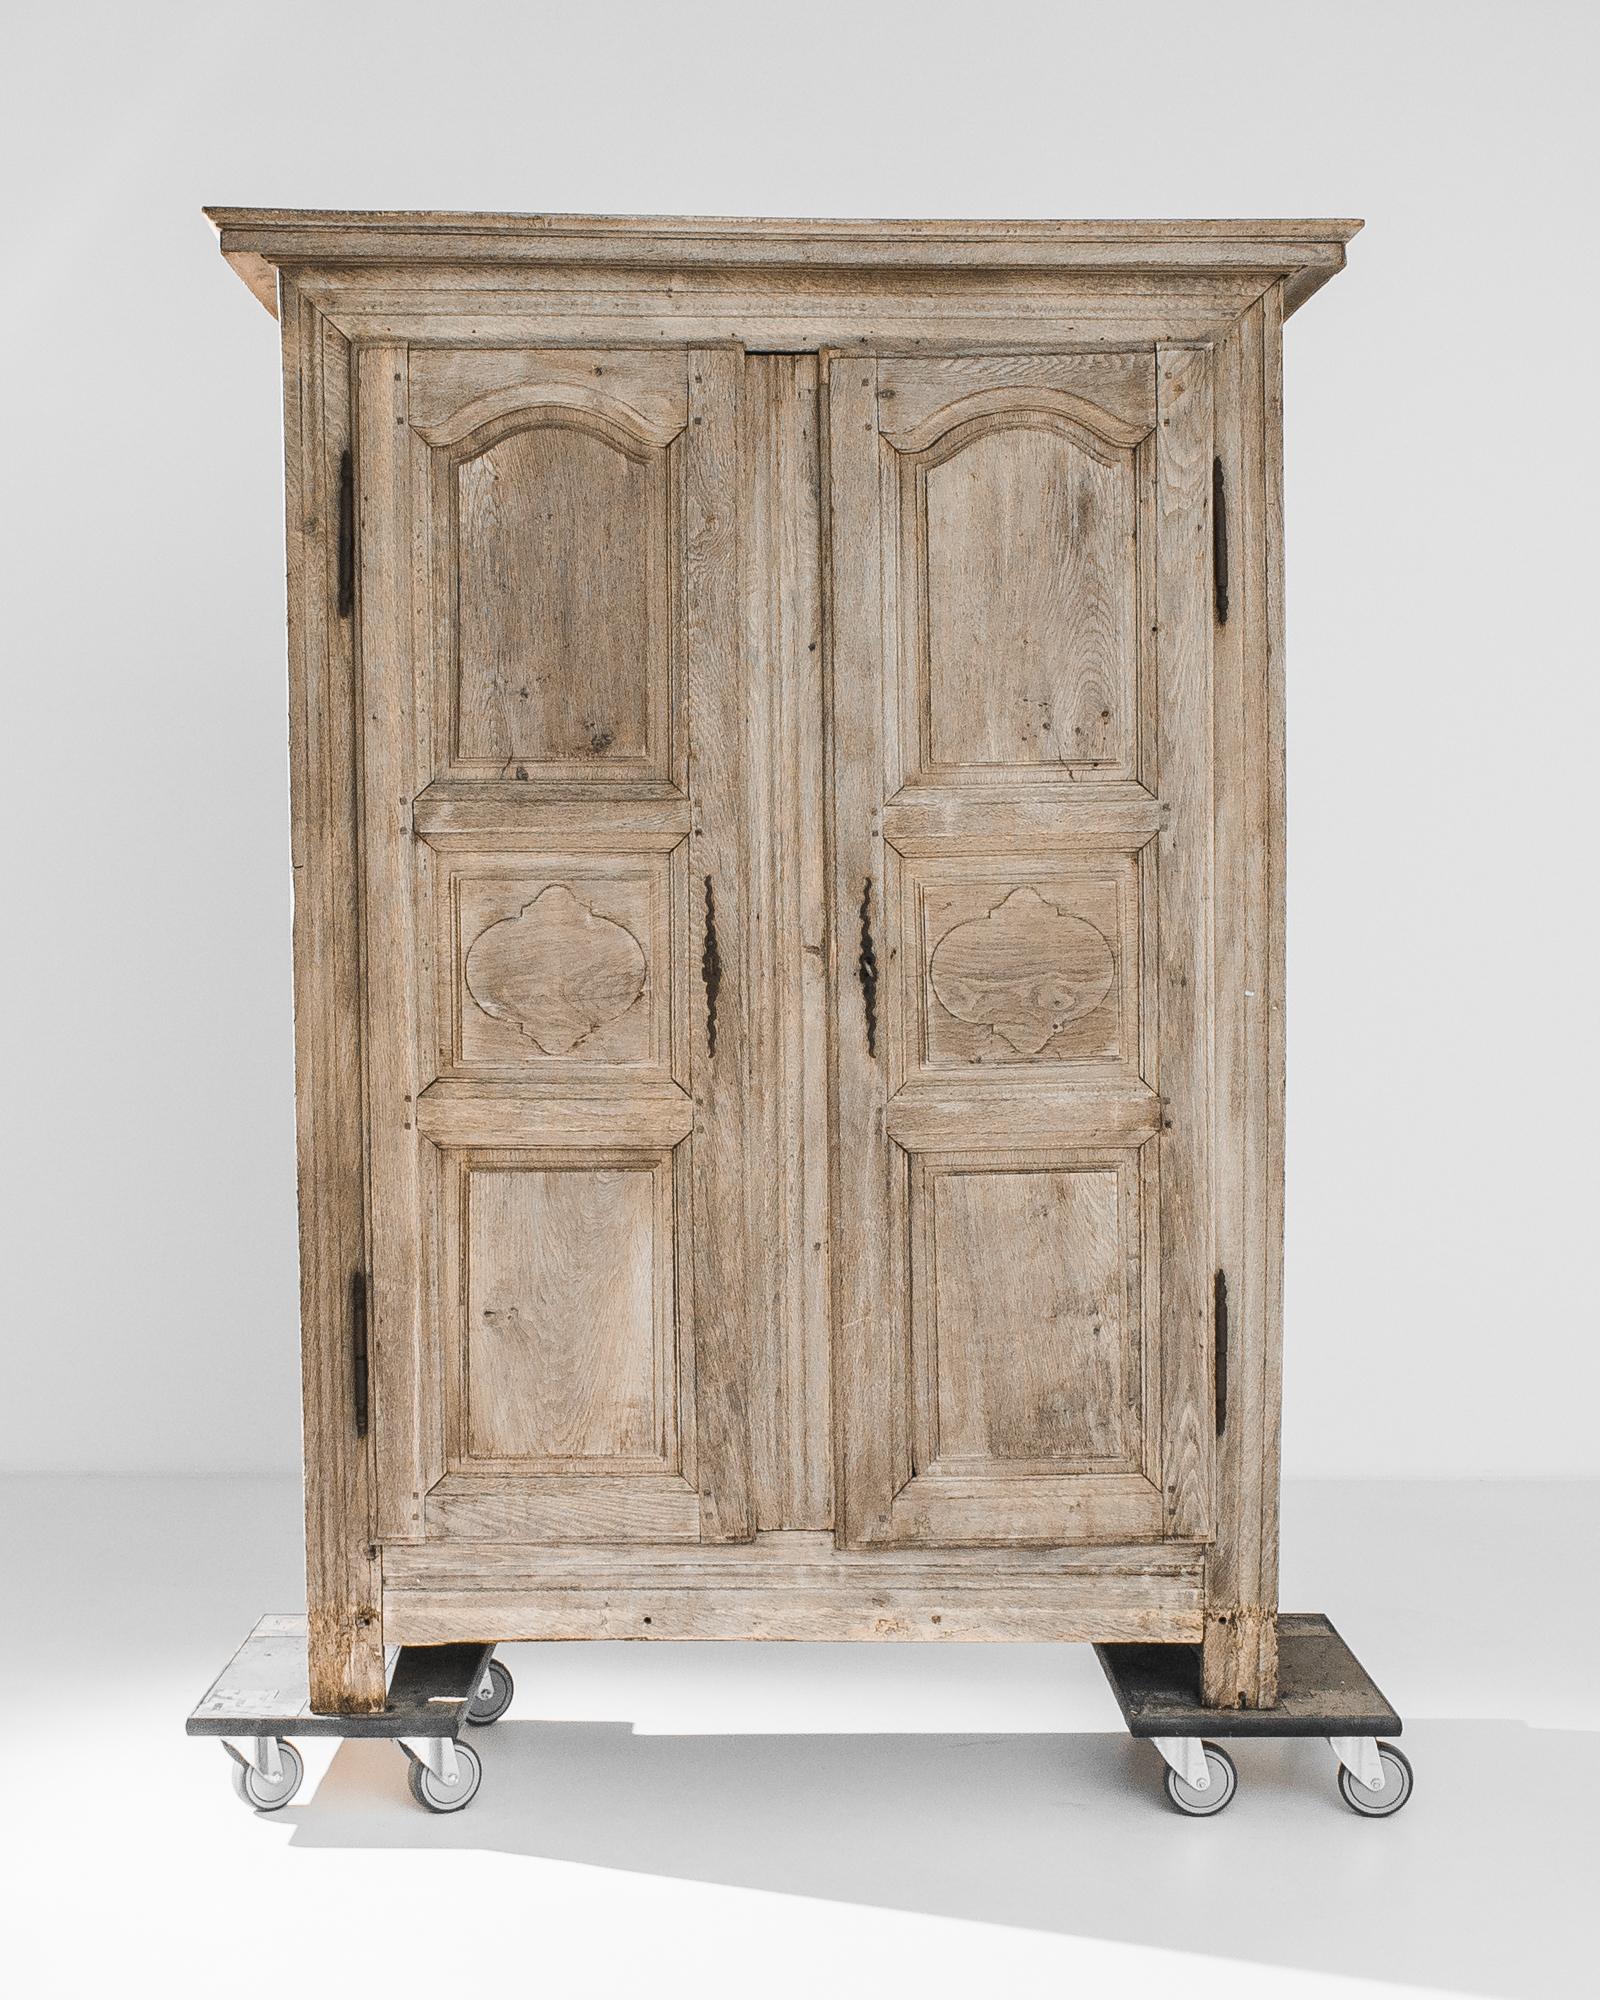 An oak cabinet from France, circa 1800. Carved quatrefoil motifs decorating the central panels of the doors and cast iron hinges lend a subtle gothic inflection to the broad silhouette. The pale golden tone of the restored oak provides a delicate